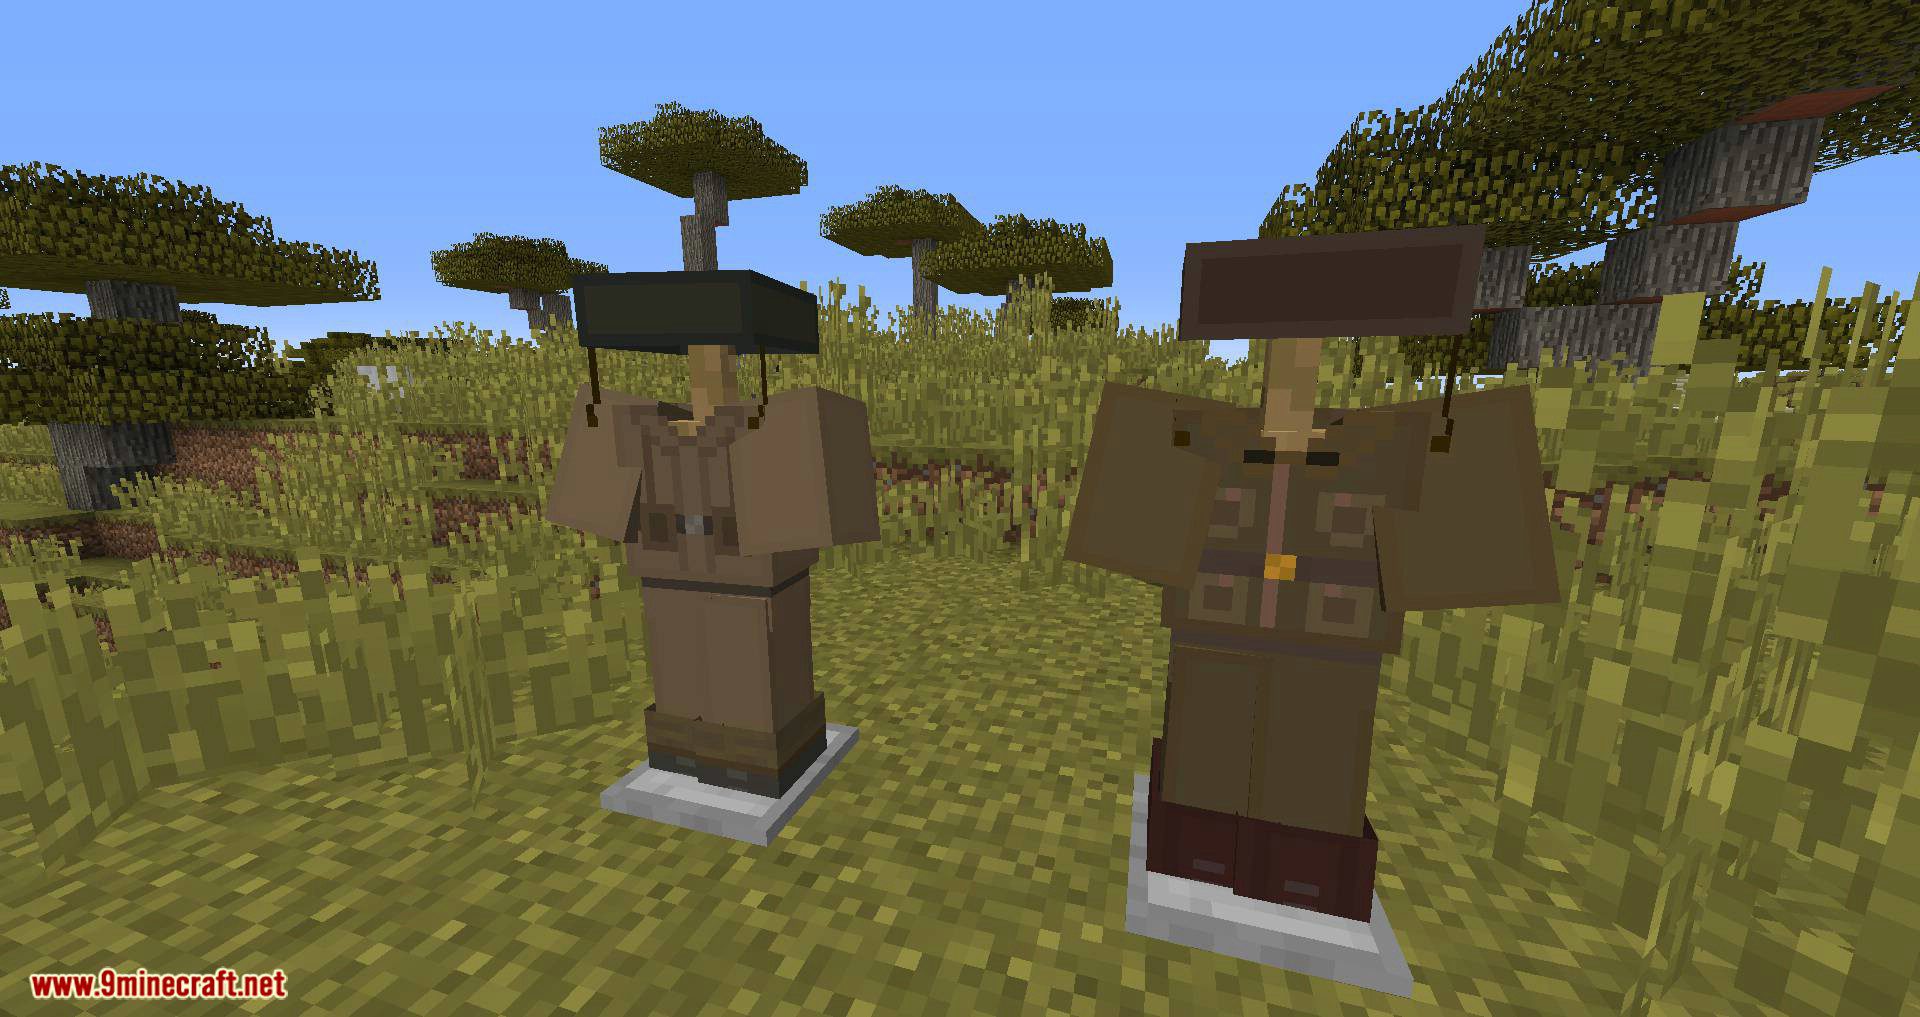 Flan_s Content Pack WW2 Armors mod for minecraft 08